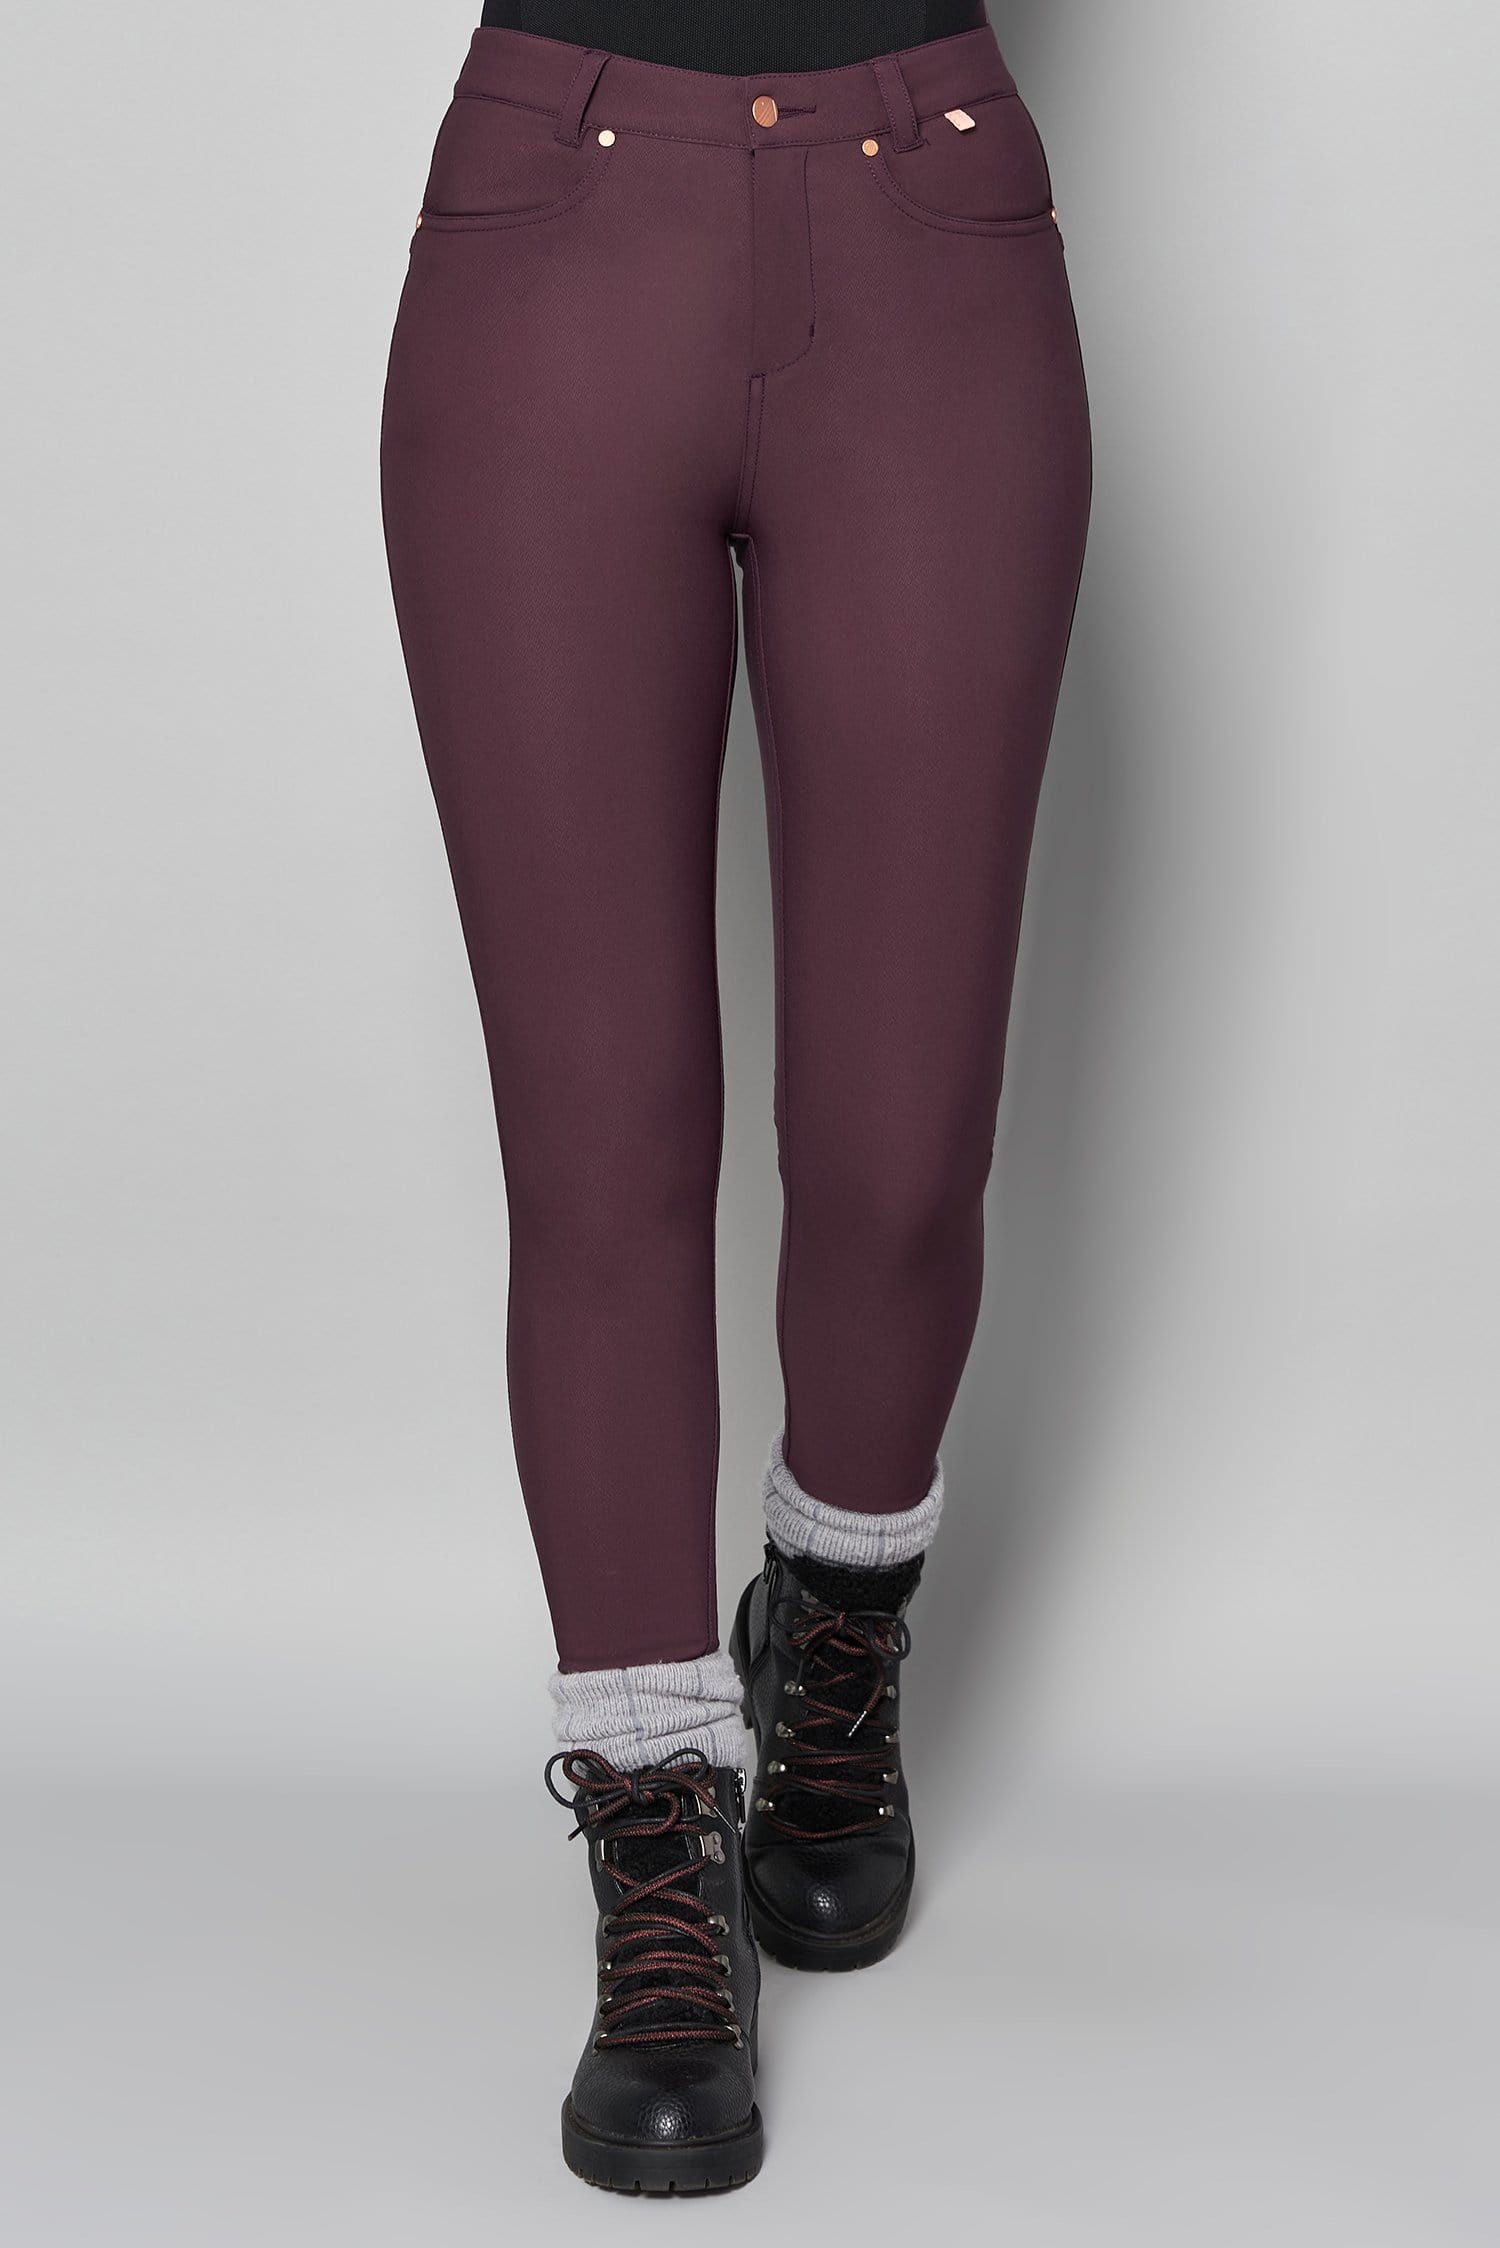 Thermal Skinny Outdoor Trousers - Aubergine - 36l / Uk18 - Womens - Acai Outdoorwear